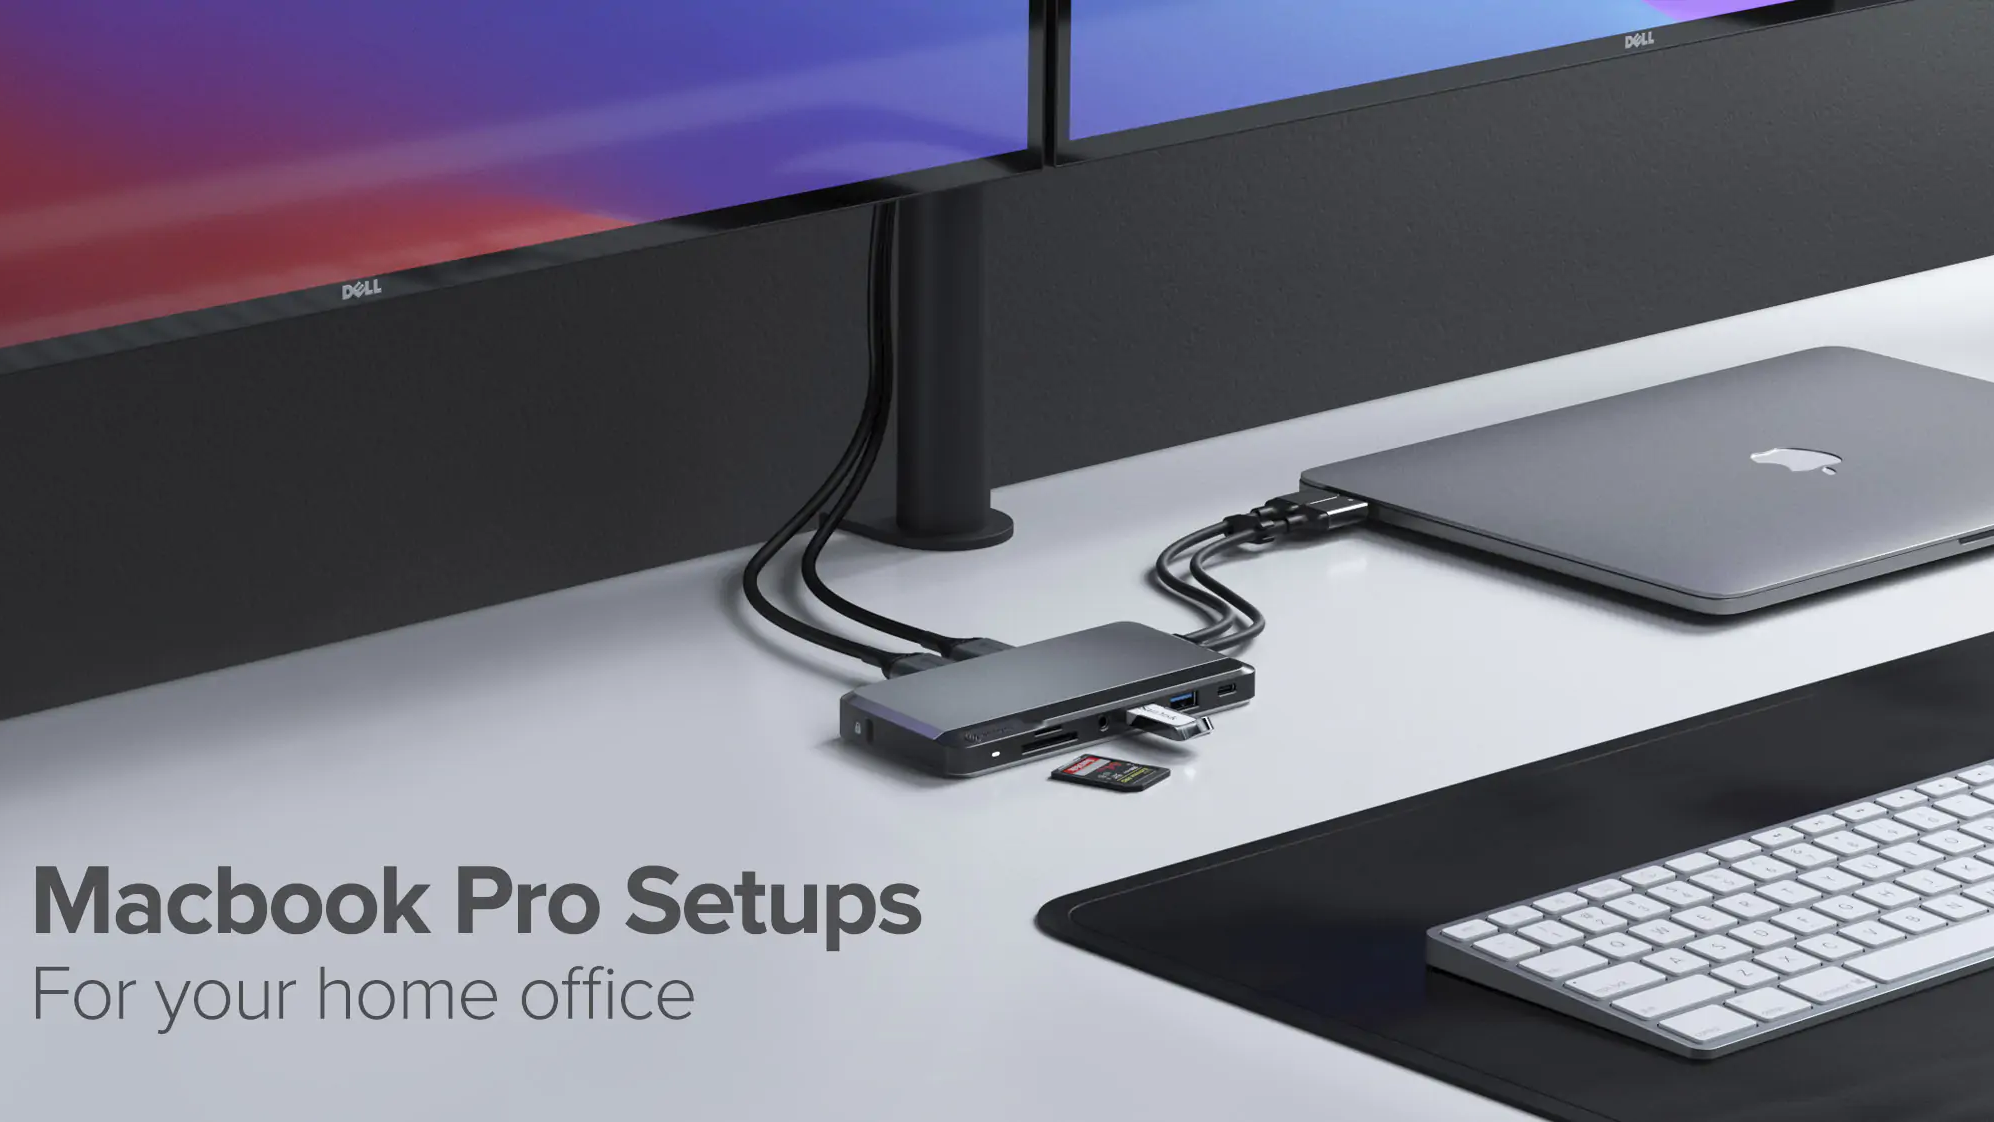 Setting up your Macbook Pro for your home office